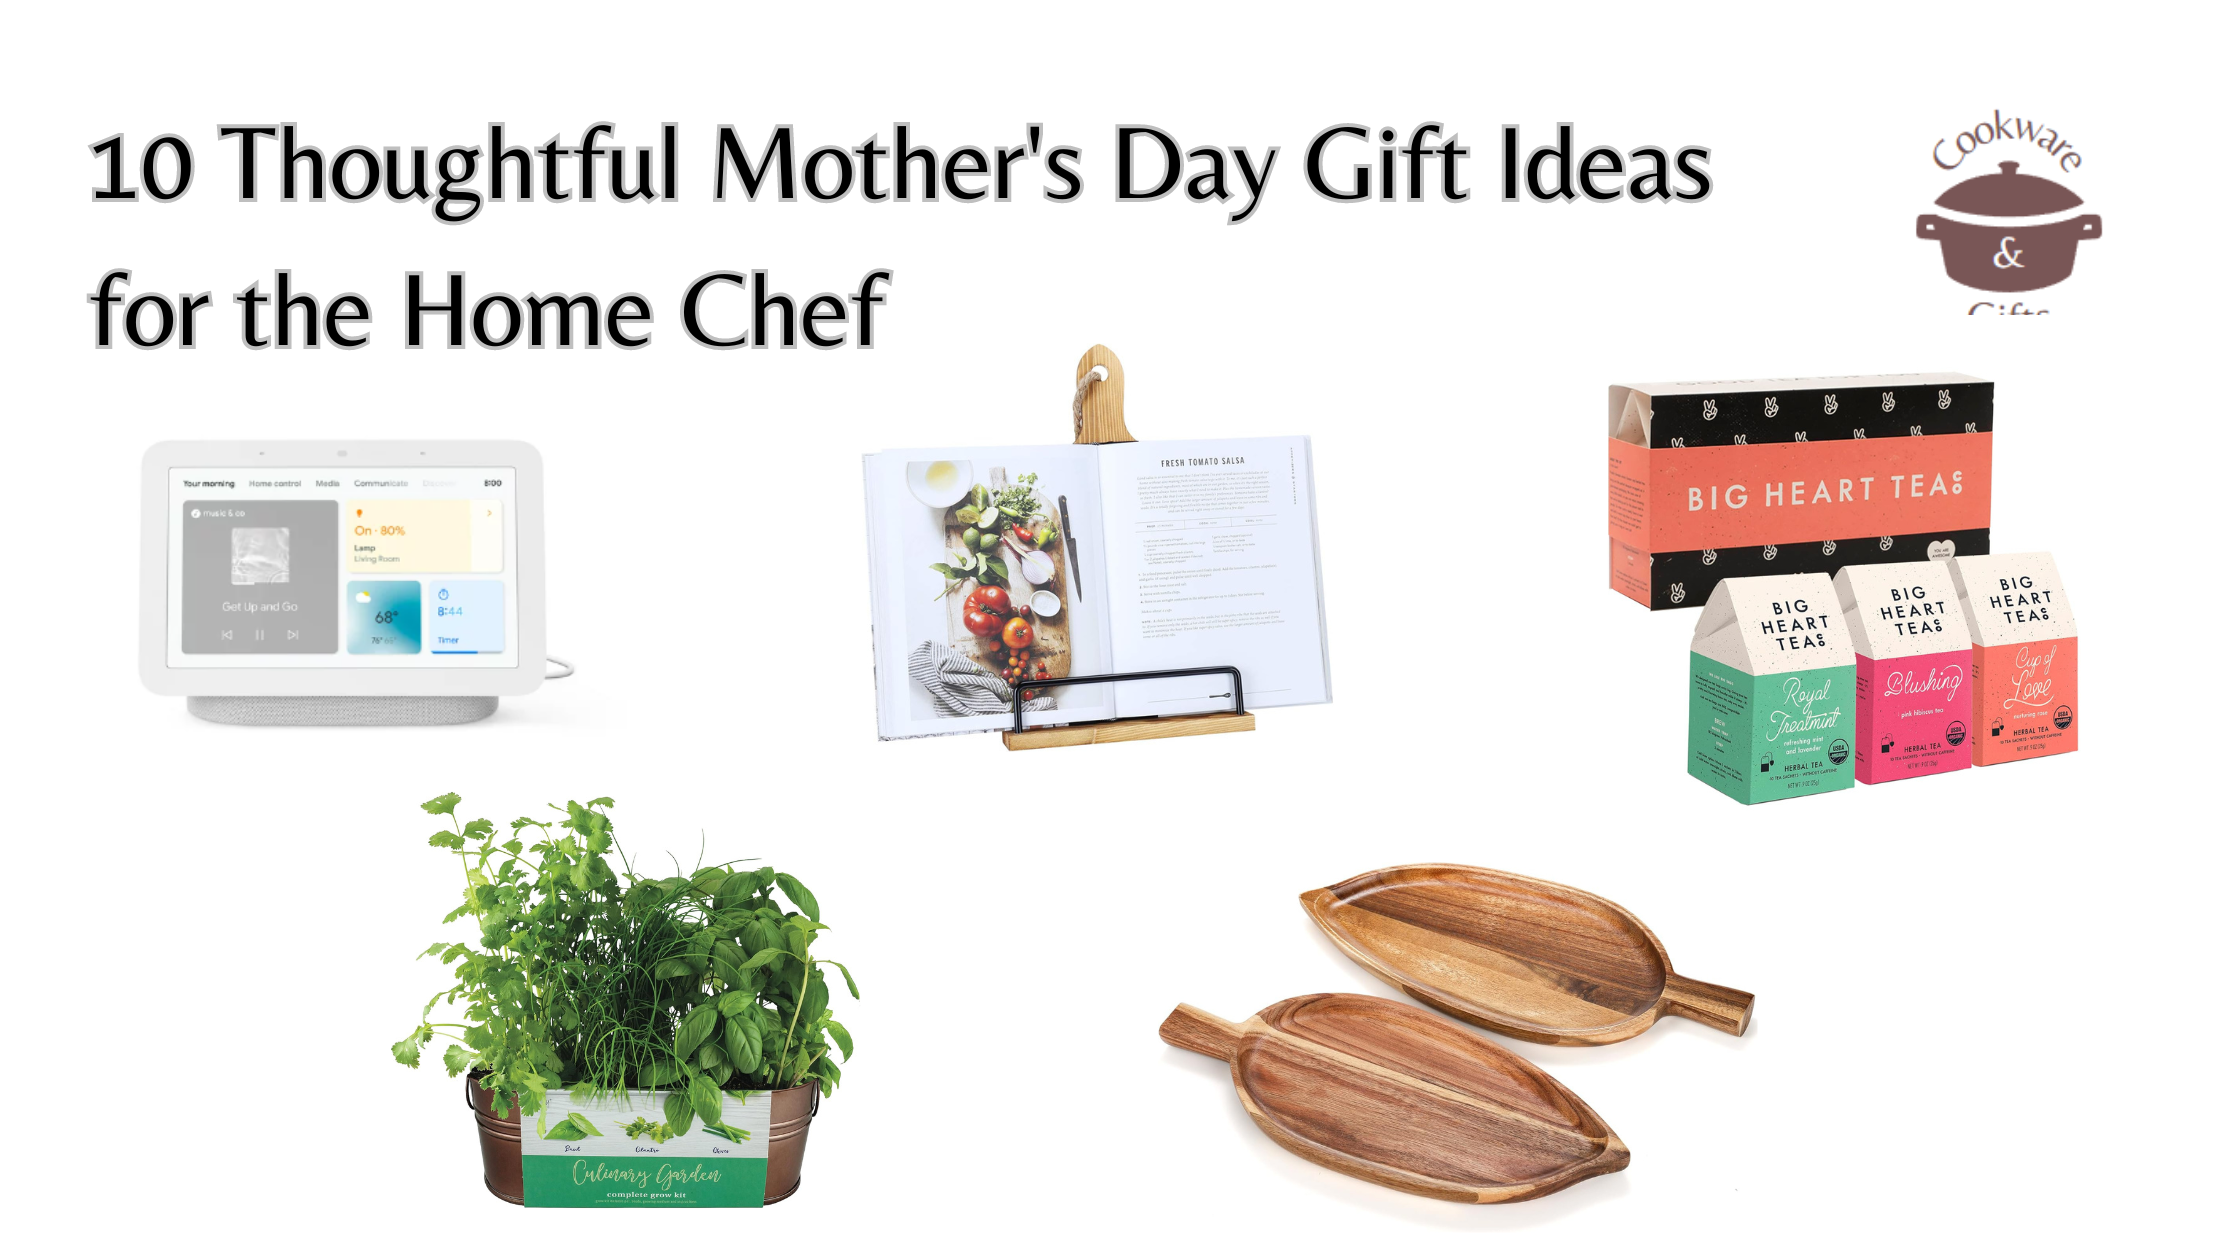 10 Thoughtful Mother’s Day Gift Ideas for the Home Chef